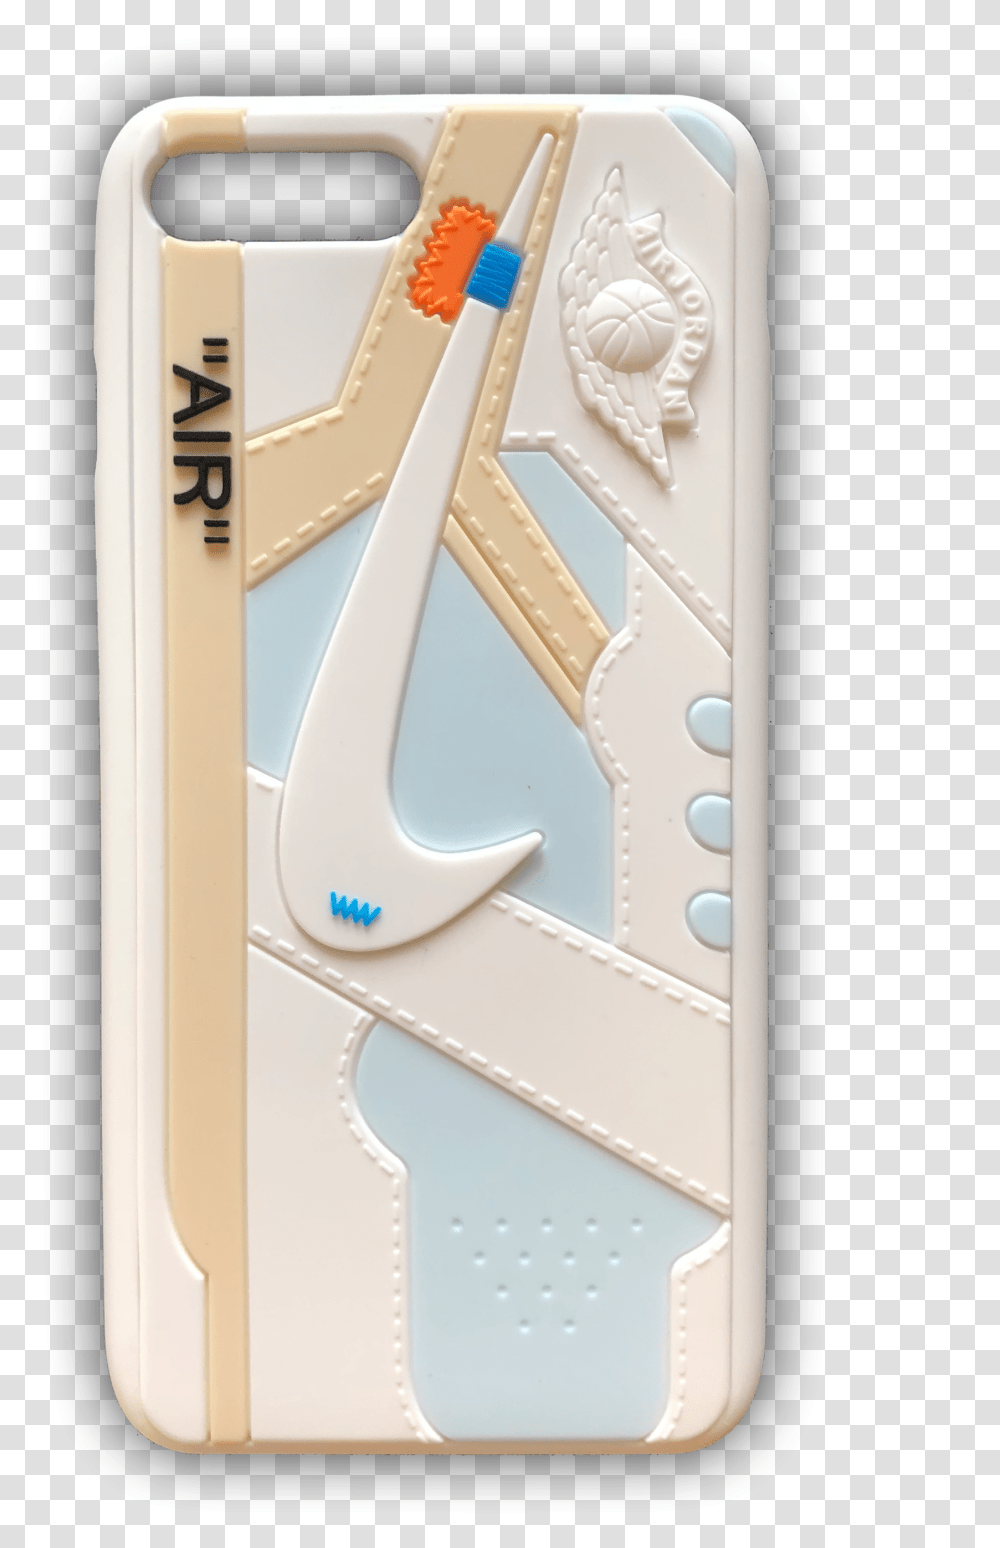 Off White 3d Textured Iphone Case Iphone, Crib, Furniture, Leisure Activities, Sundial Transparent Png